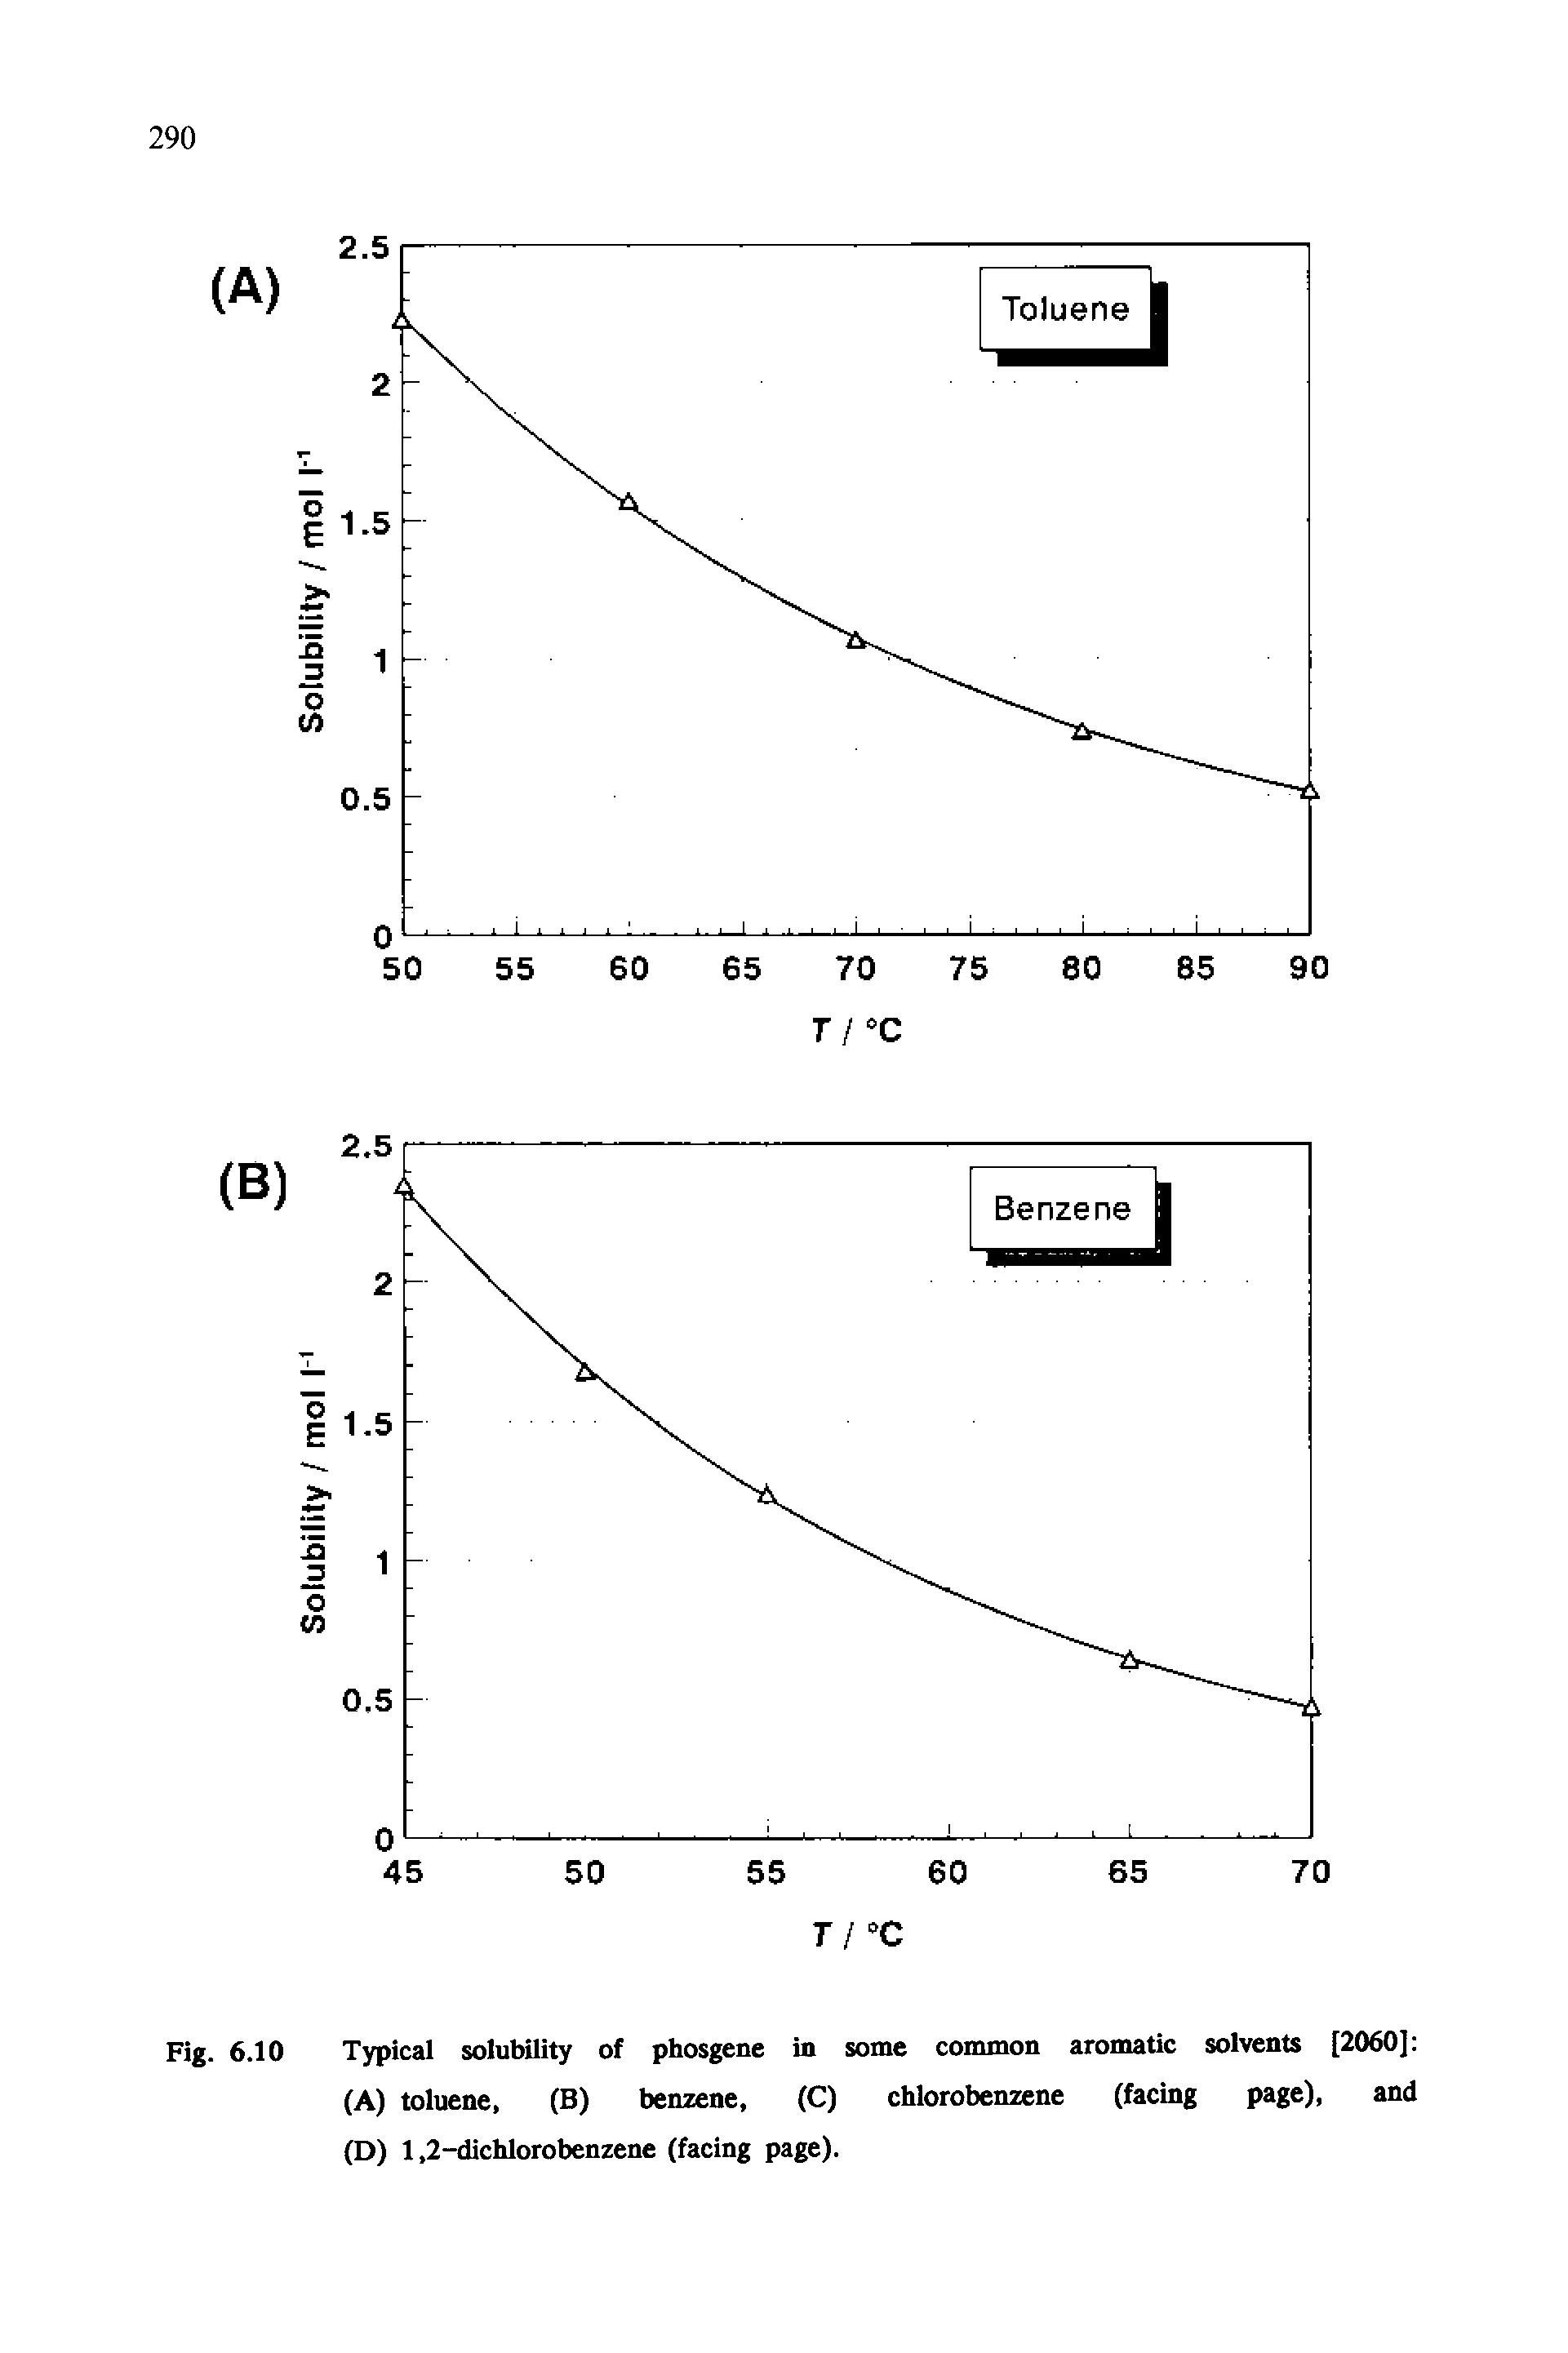 Fig. 6.10 Typical solubility of phosgene in some common aromatic solvents [2060] (A) toluene, (B) benzene, (C) chlorobenzene (facing page), and (D) 1,2-dichlorobenzene (facing page).